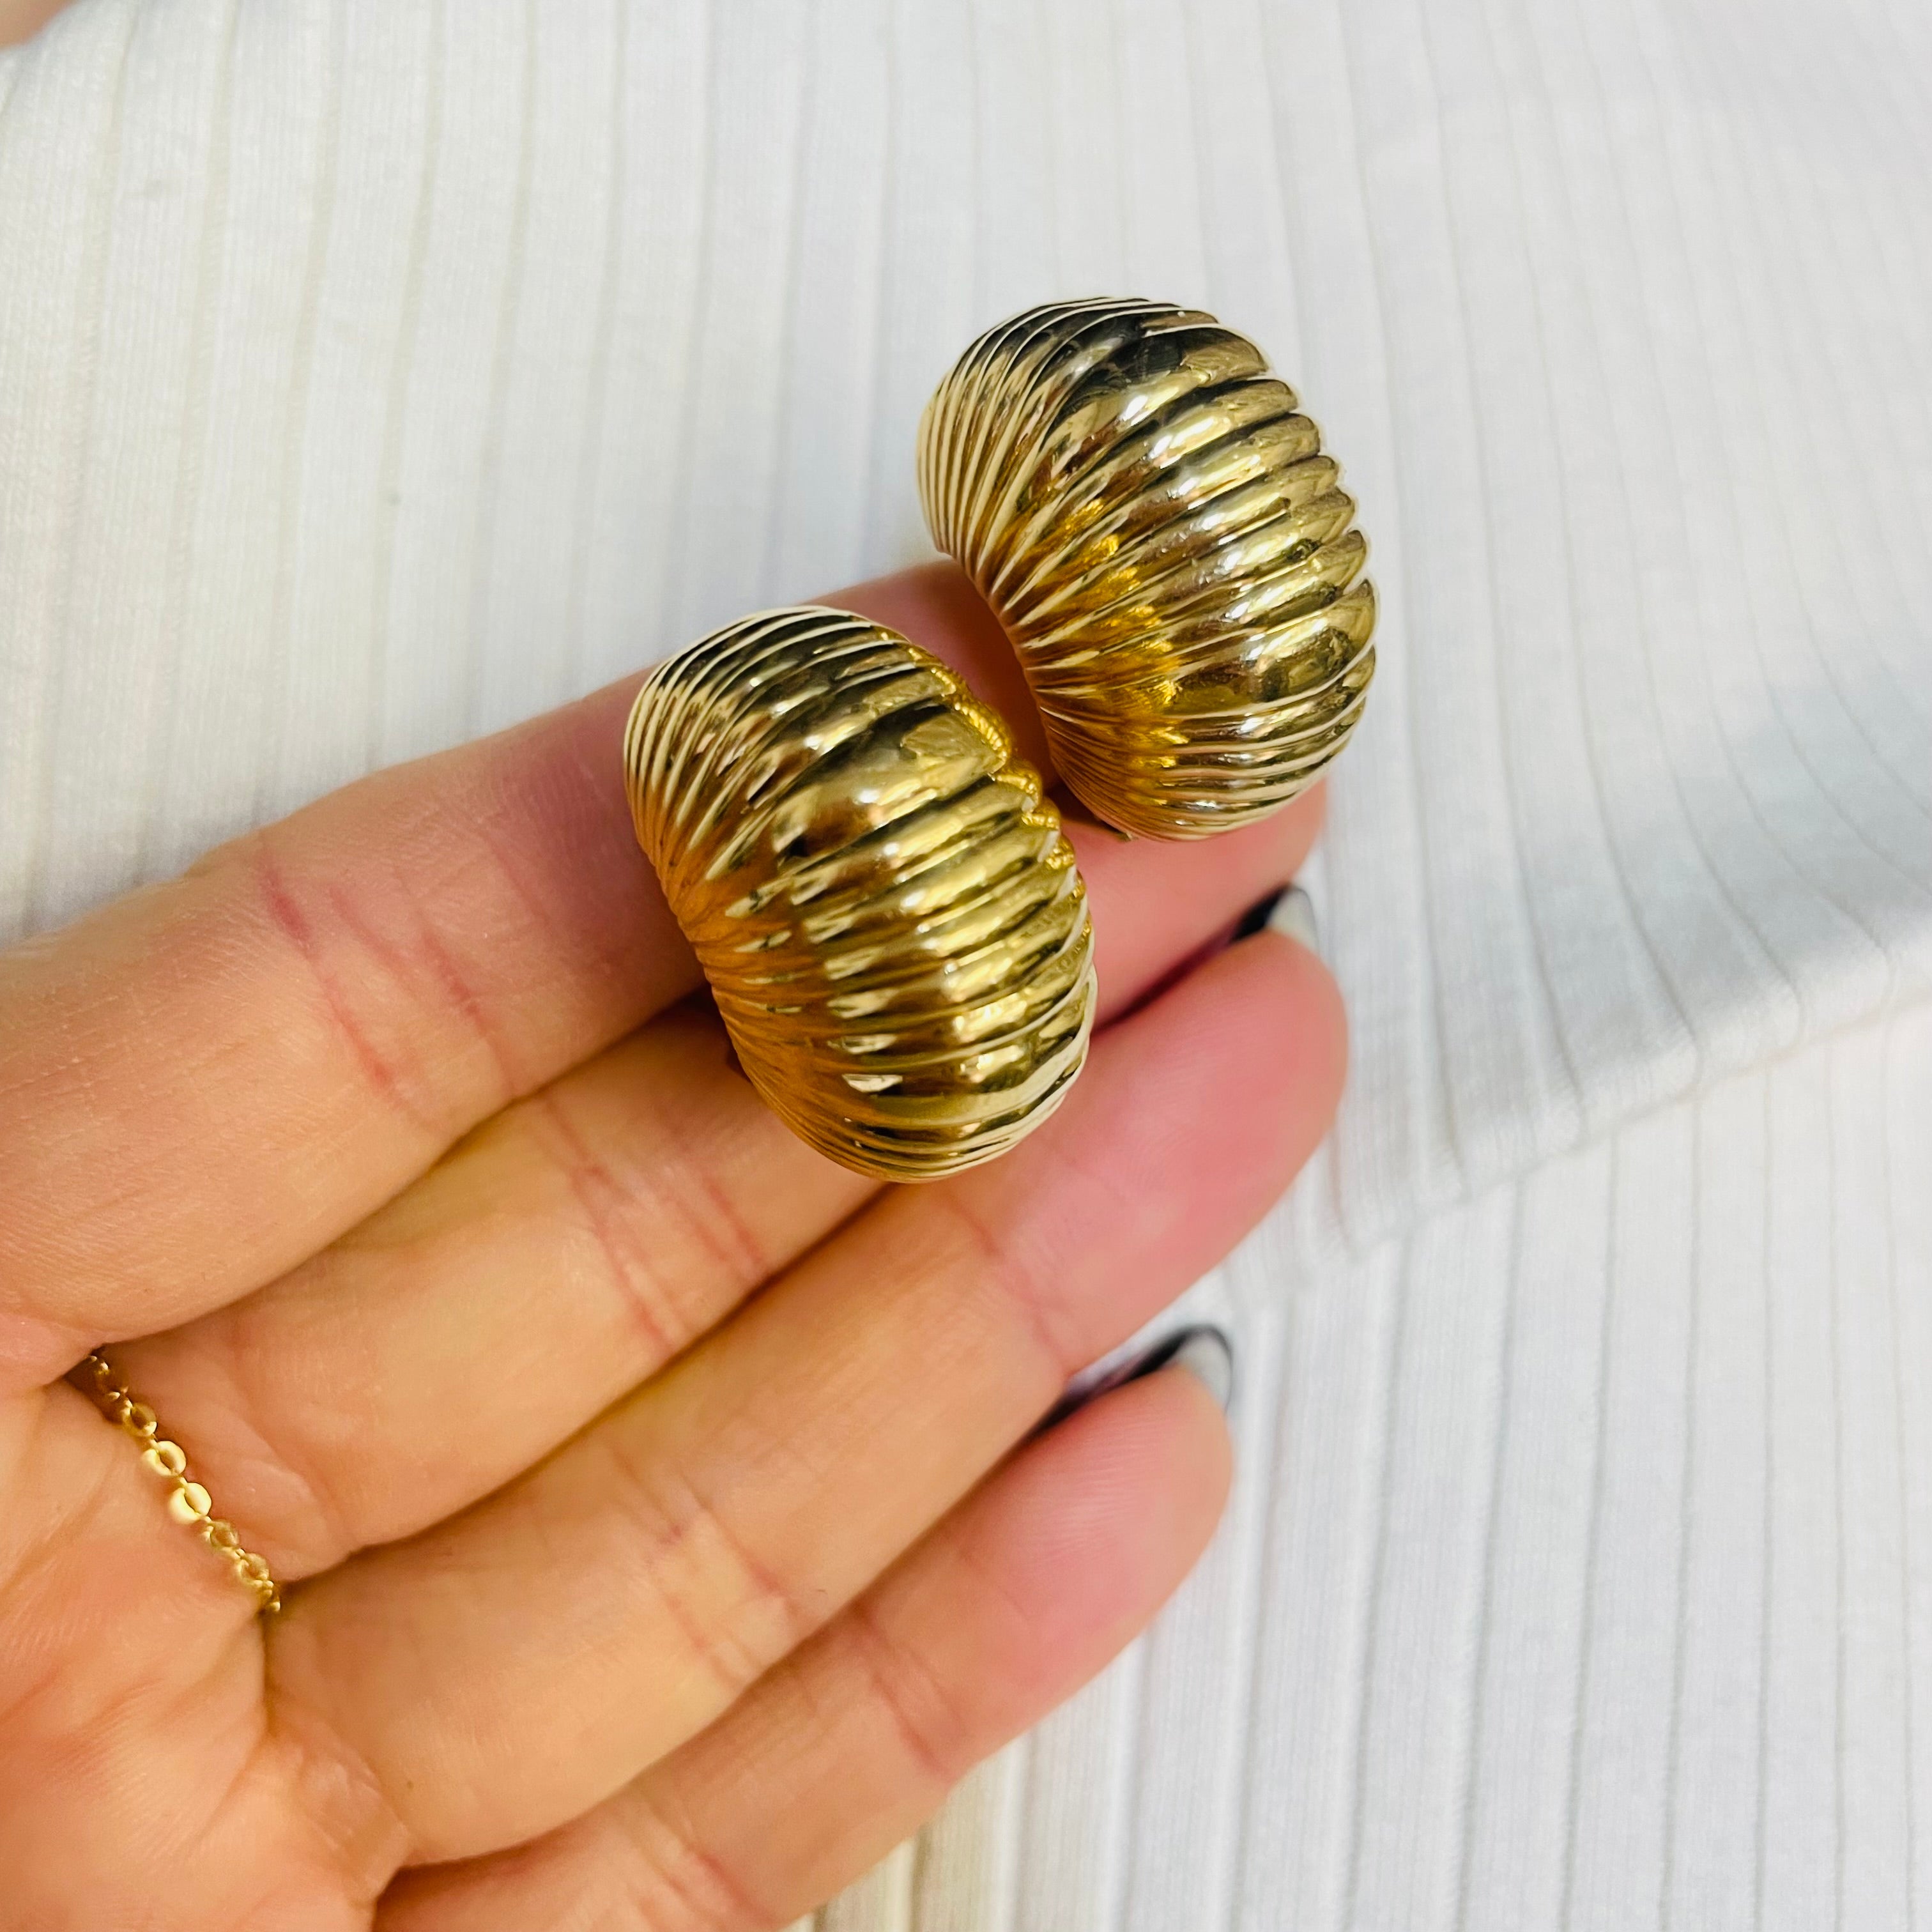 Gorgeous Cartier Puffy Tubogas 14K Yellow Gold Earrings